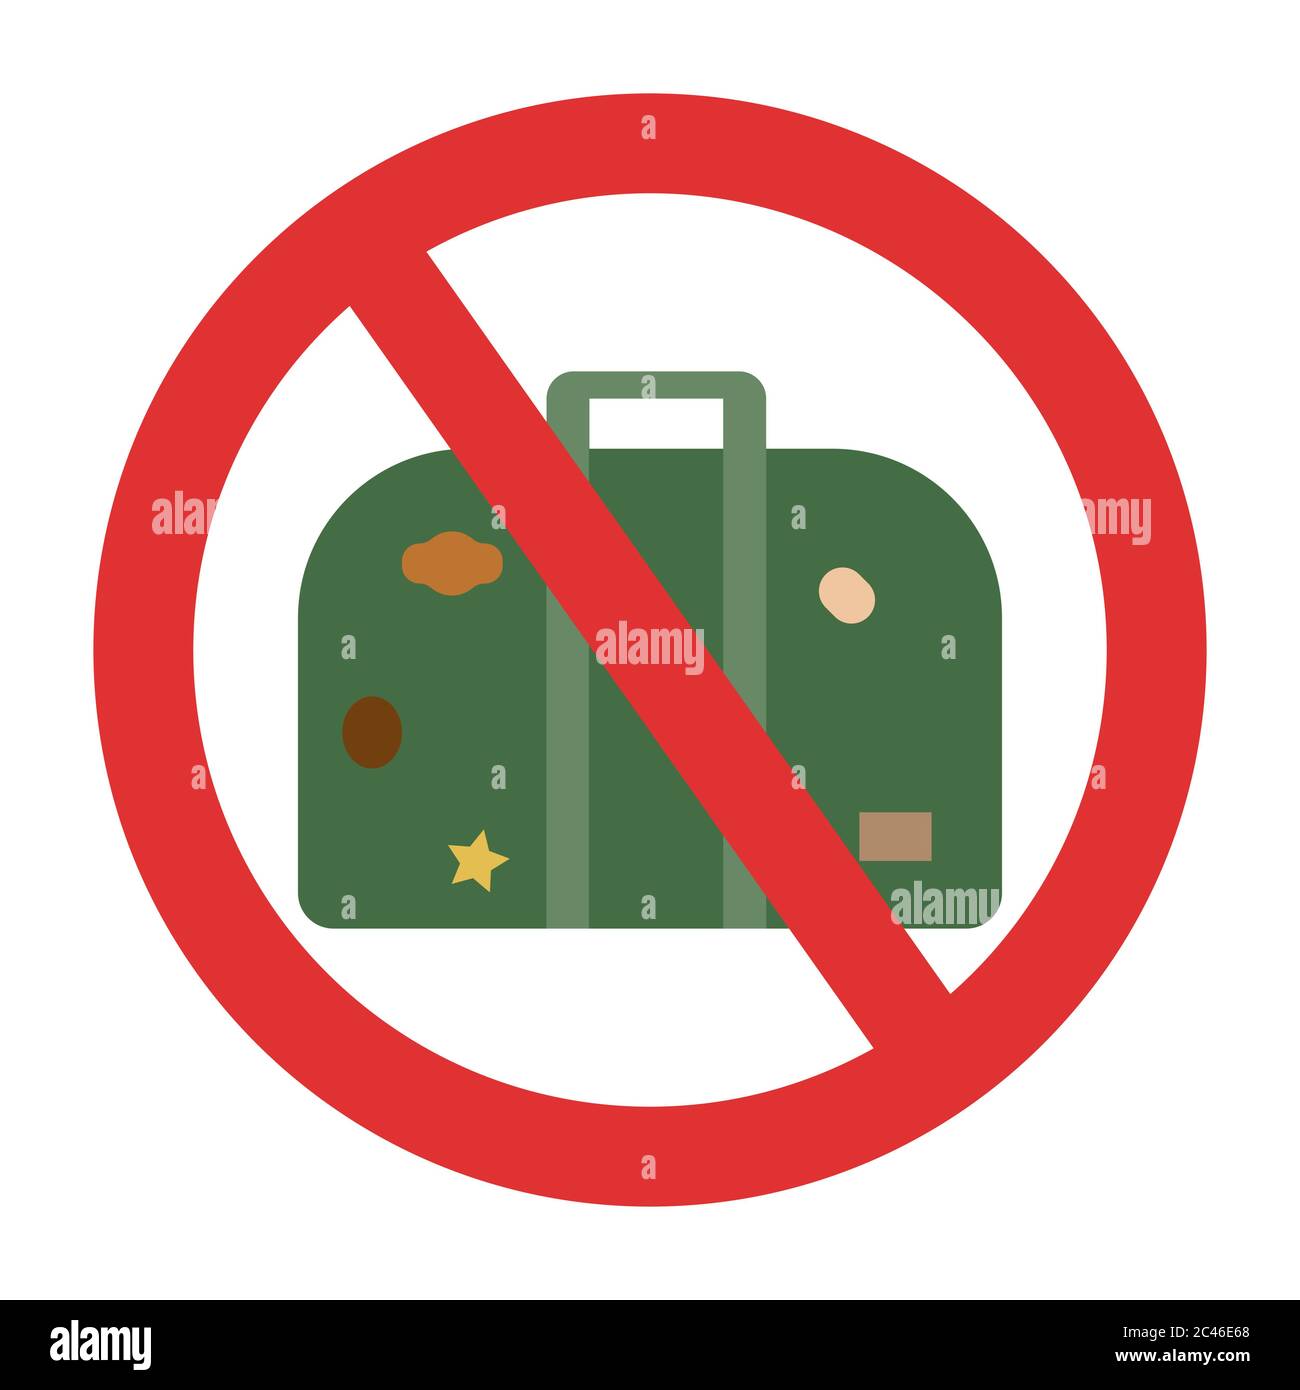 Ban on luggage. Travel ban. Stop travel isolated illustration. Stay home COVID-19 prevention. Stock Vector